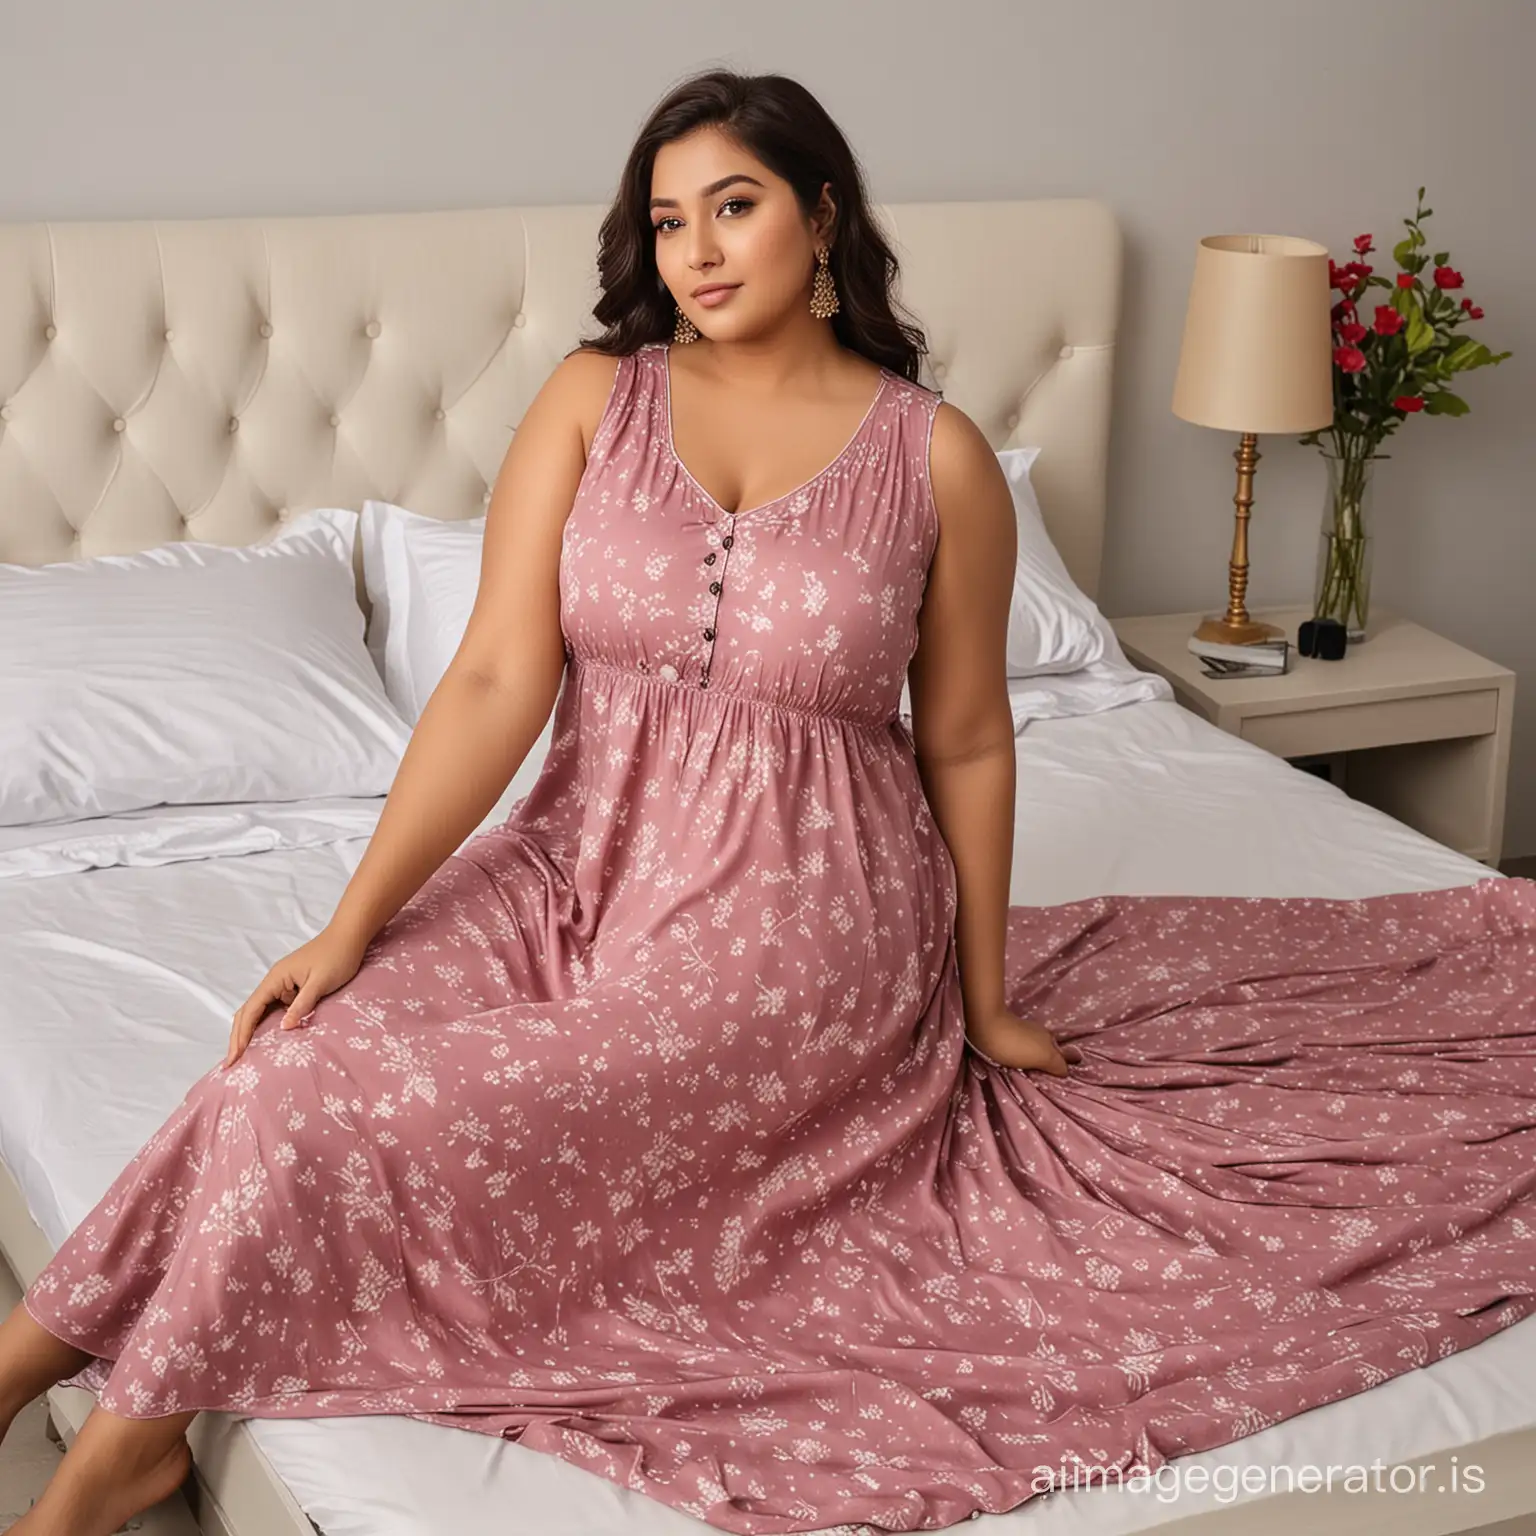 Elegant-Plus-Size-Indian-Woman-in-Sleeveless-Nighty-Resting-on-Bed